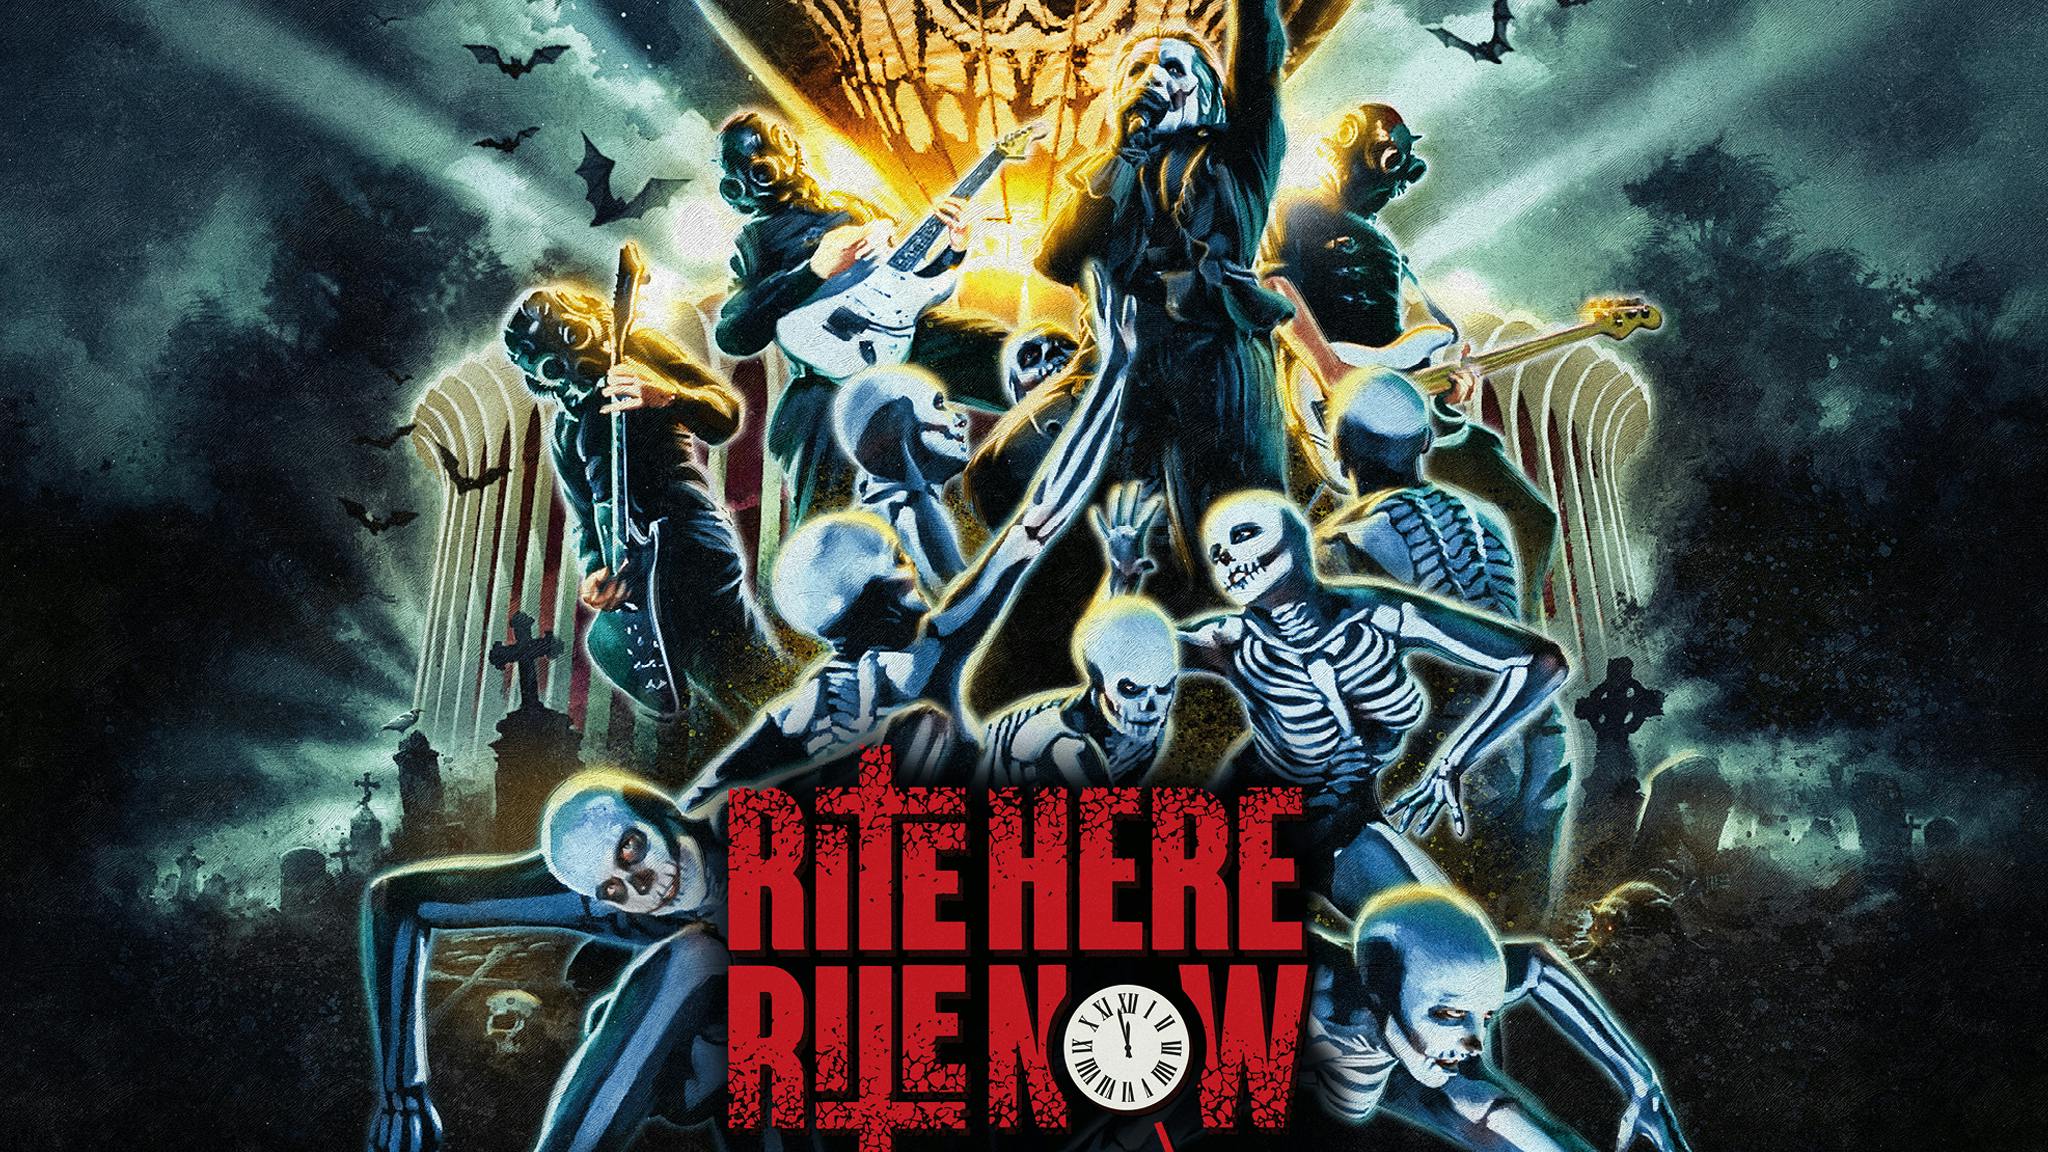 Ghost have announced their new movie, Rite Here Rite Now